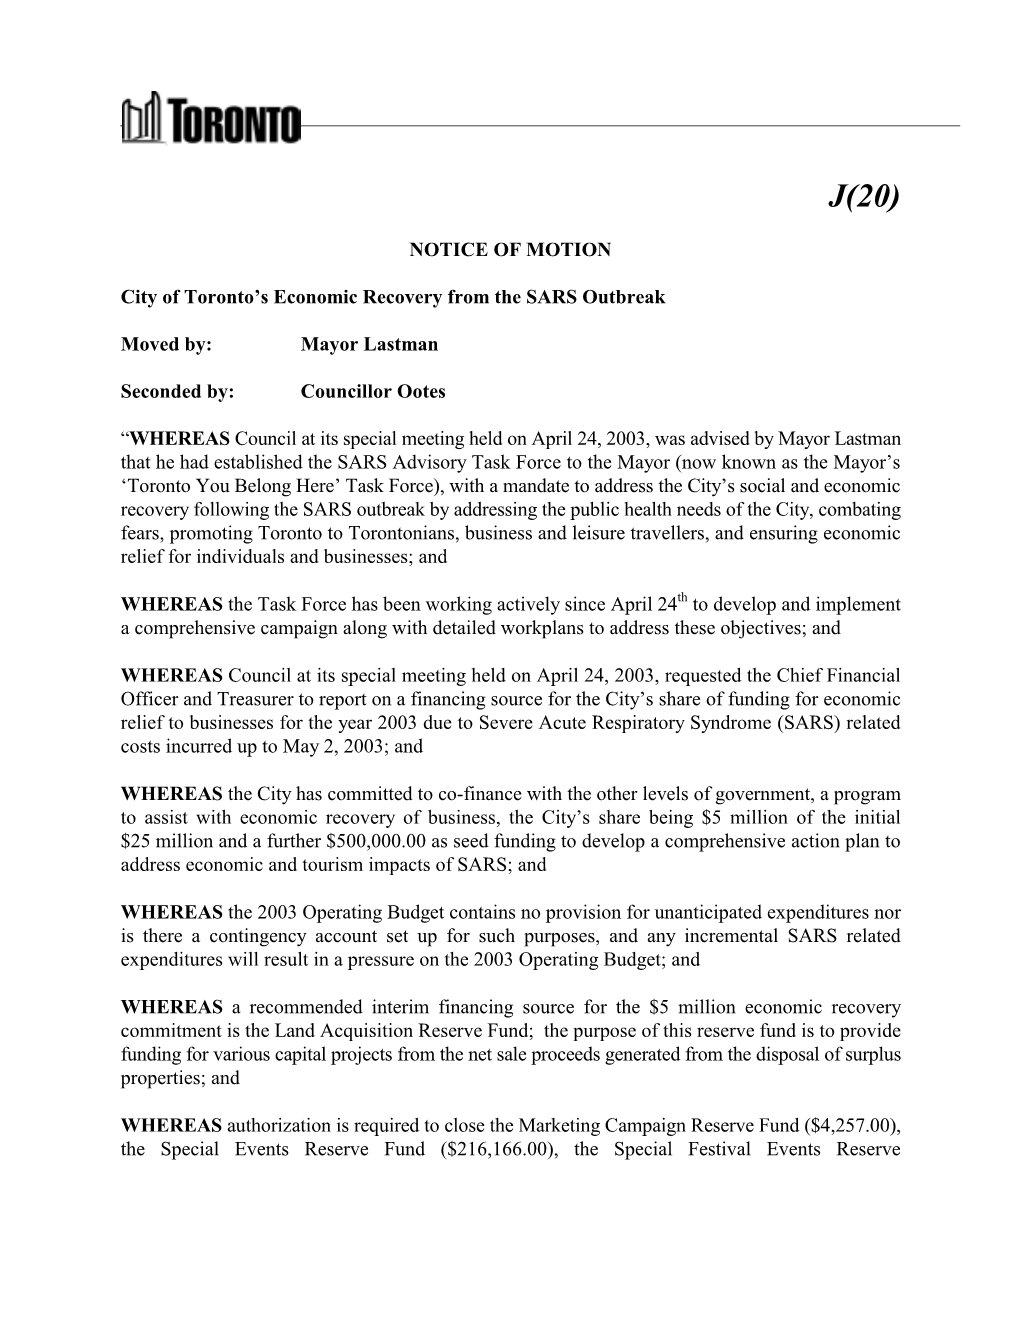 NOTICE of MOTION City of Toronto's Economic Recovery from the SARS